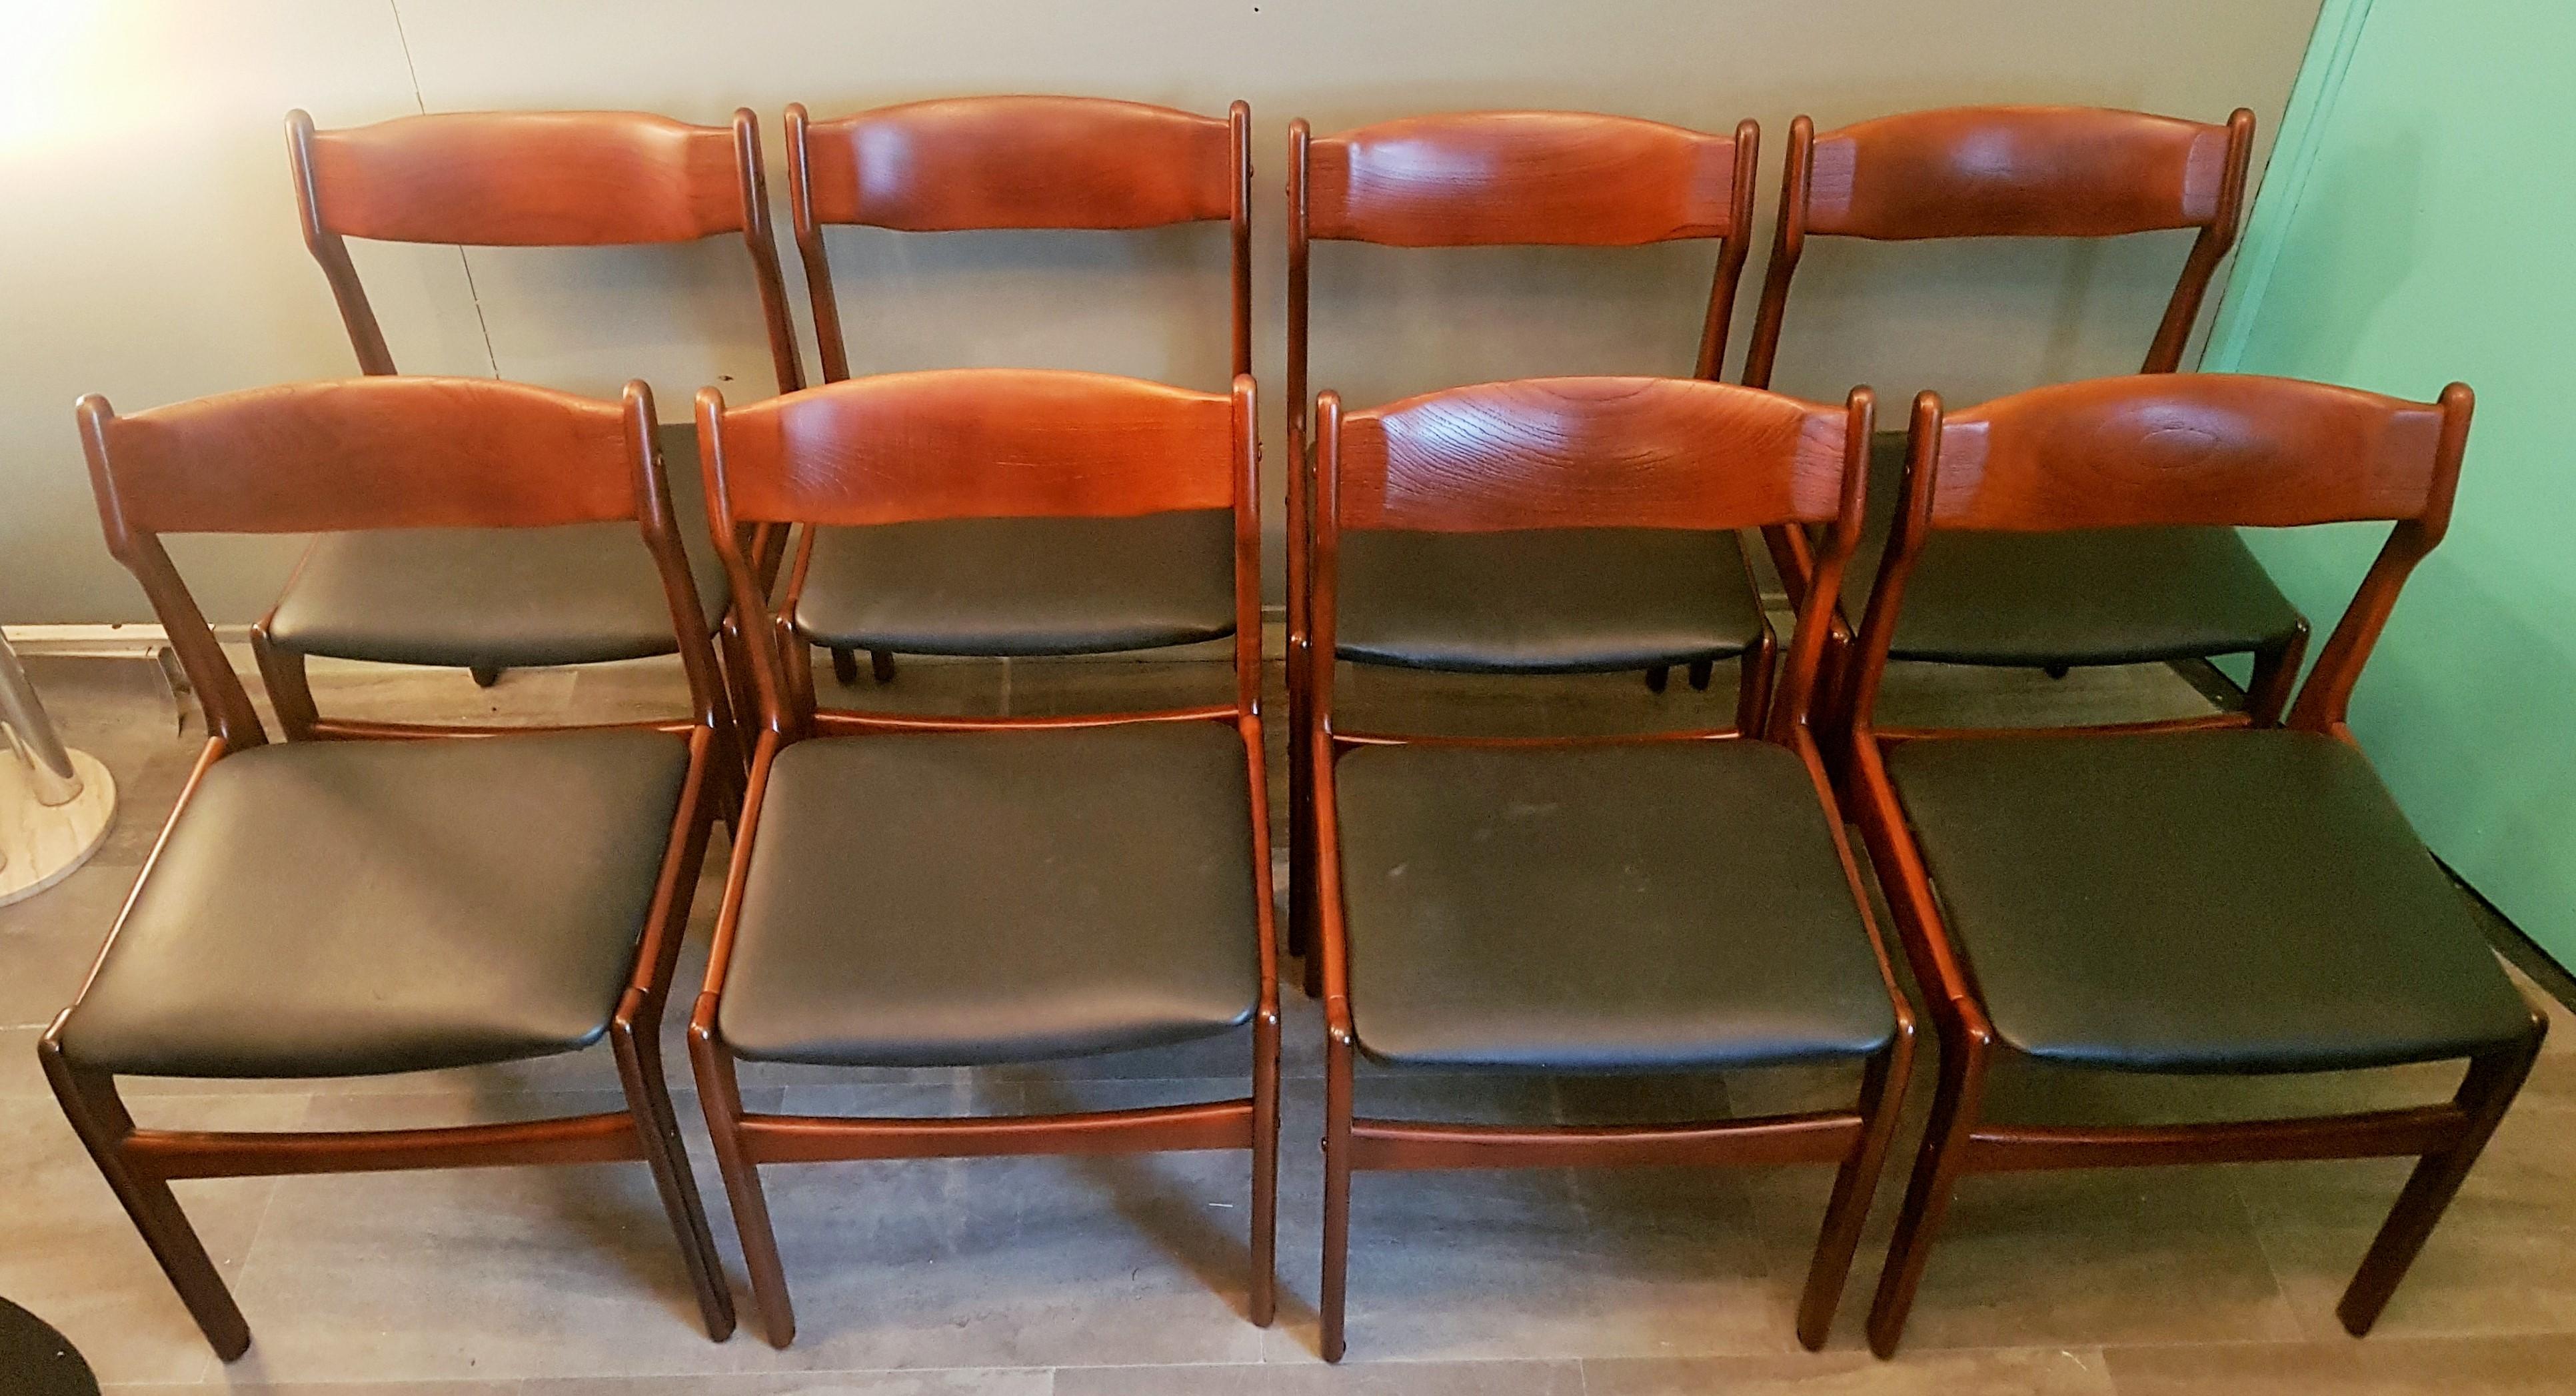 Midcentury set of 8 Erik Buch dining chairs in teak from Erik Buch, 1960s
fully restored. Upholstery genuine black leather. New lacquer finish.